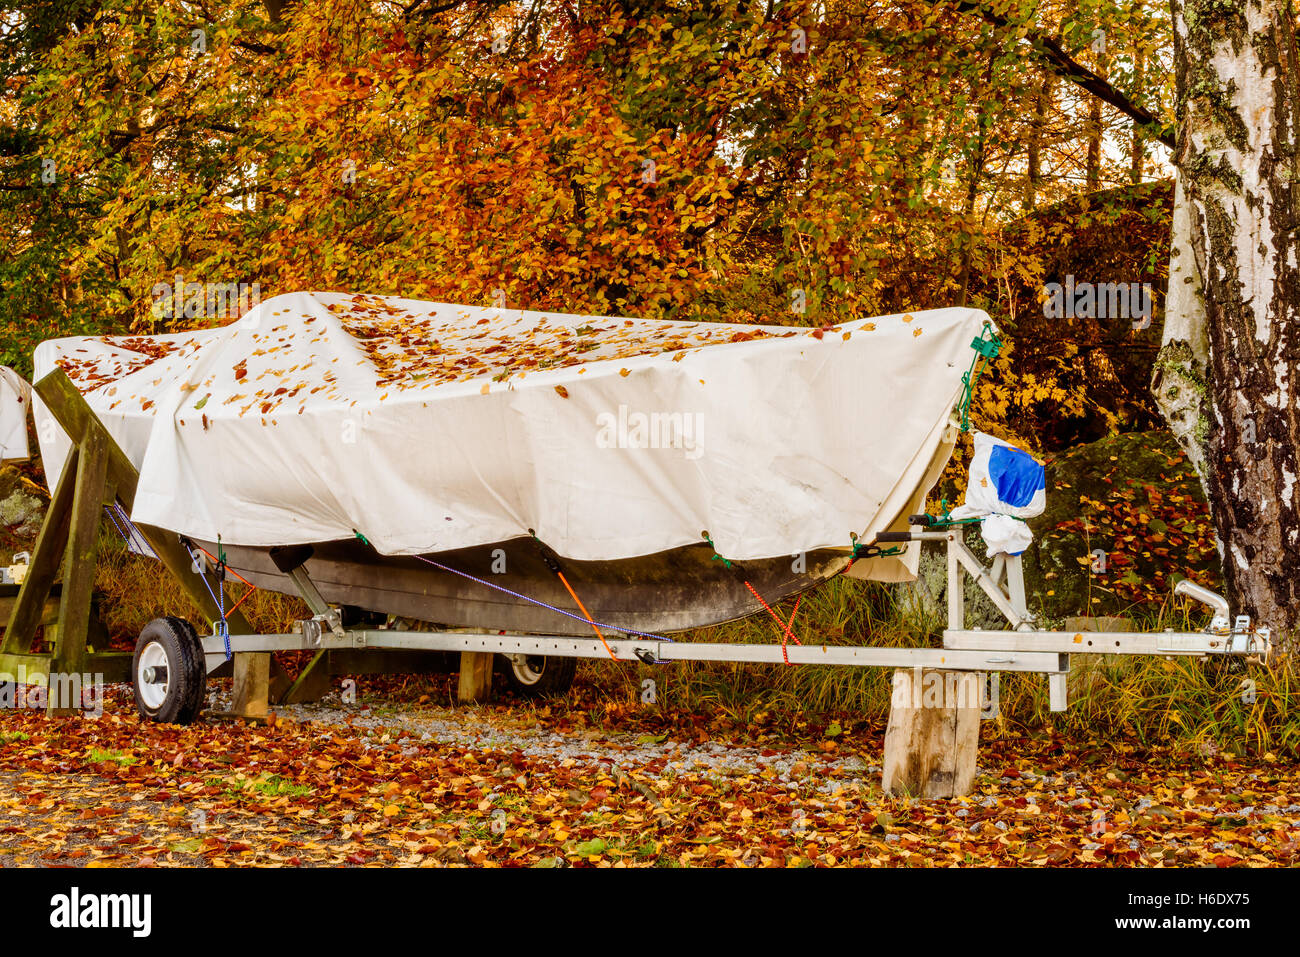 Small recreational boat under a tarp on a trailer in fall. Stock Photo